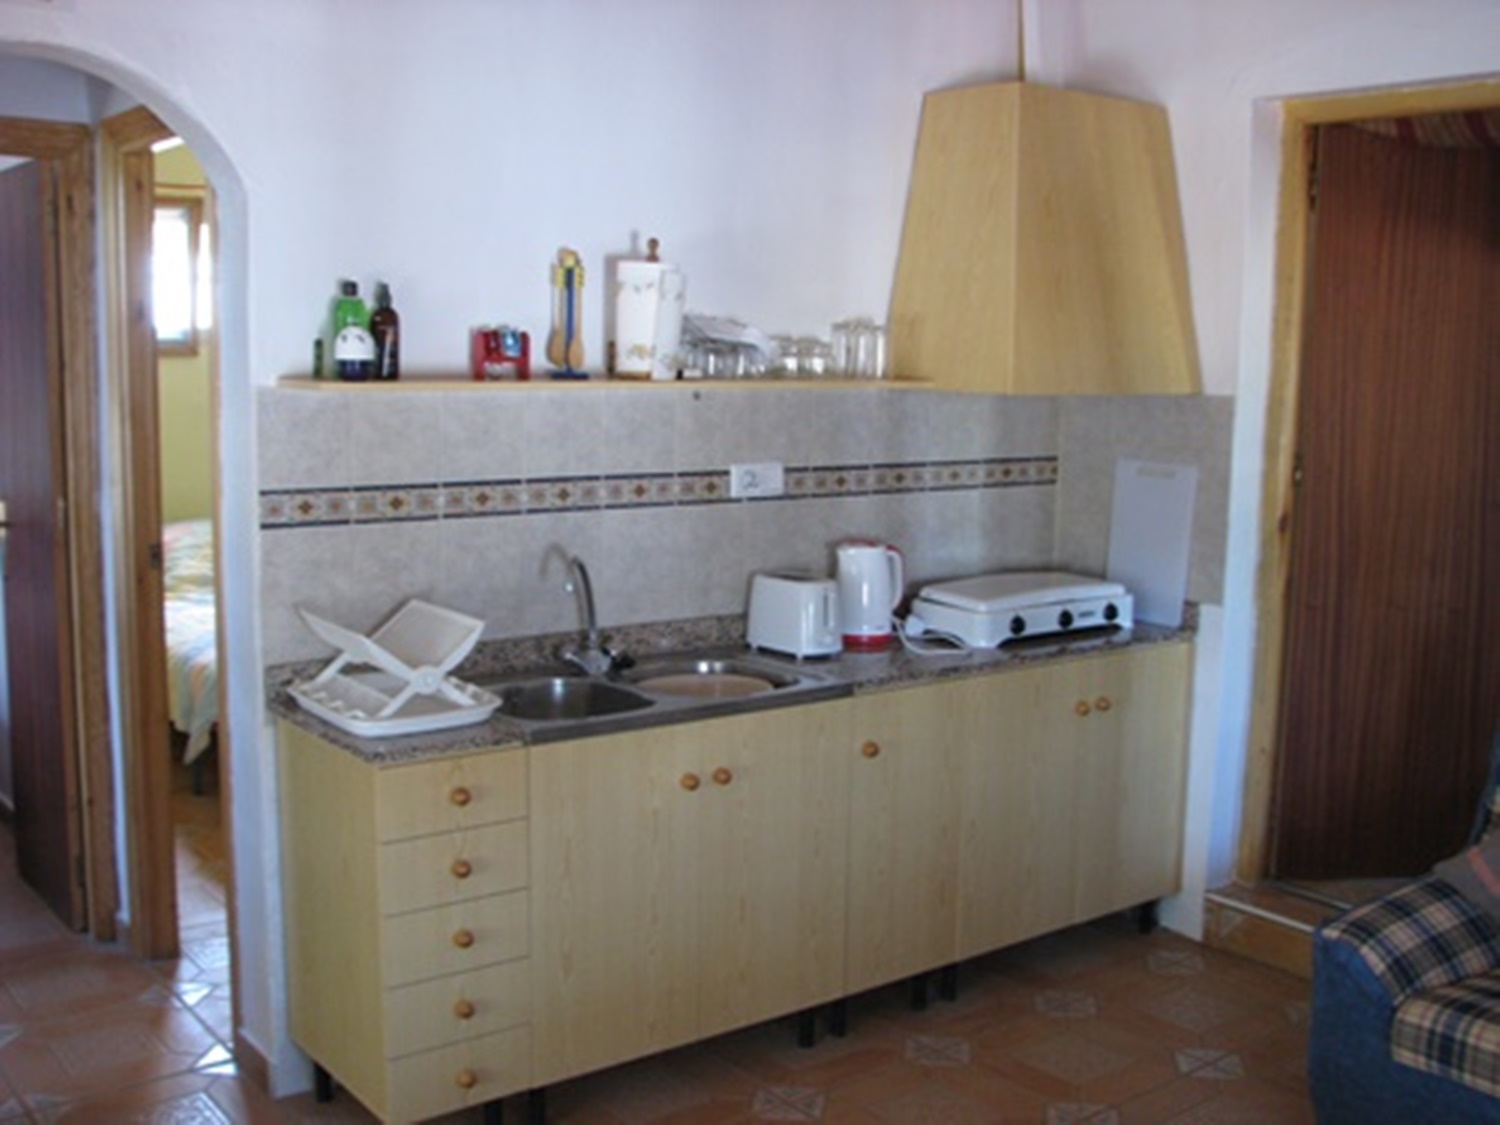 Budget Accommodation to rent in Mula, Murcia, Spain